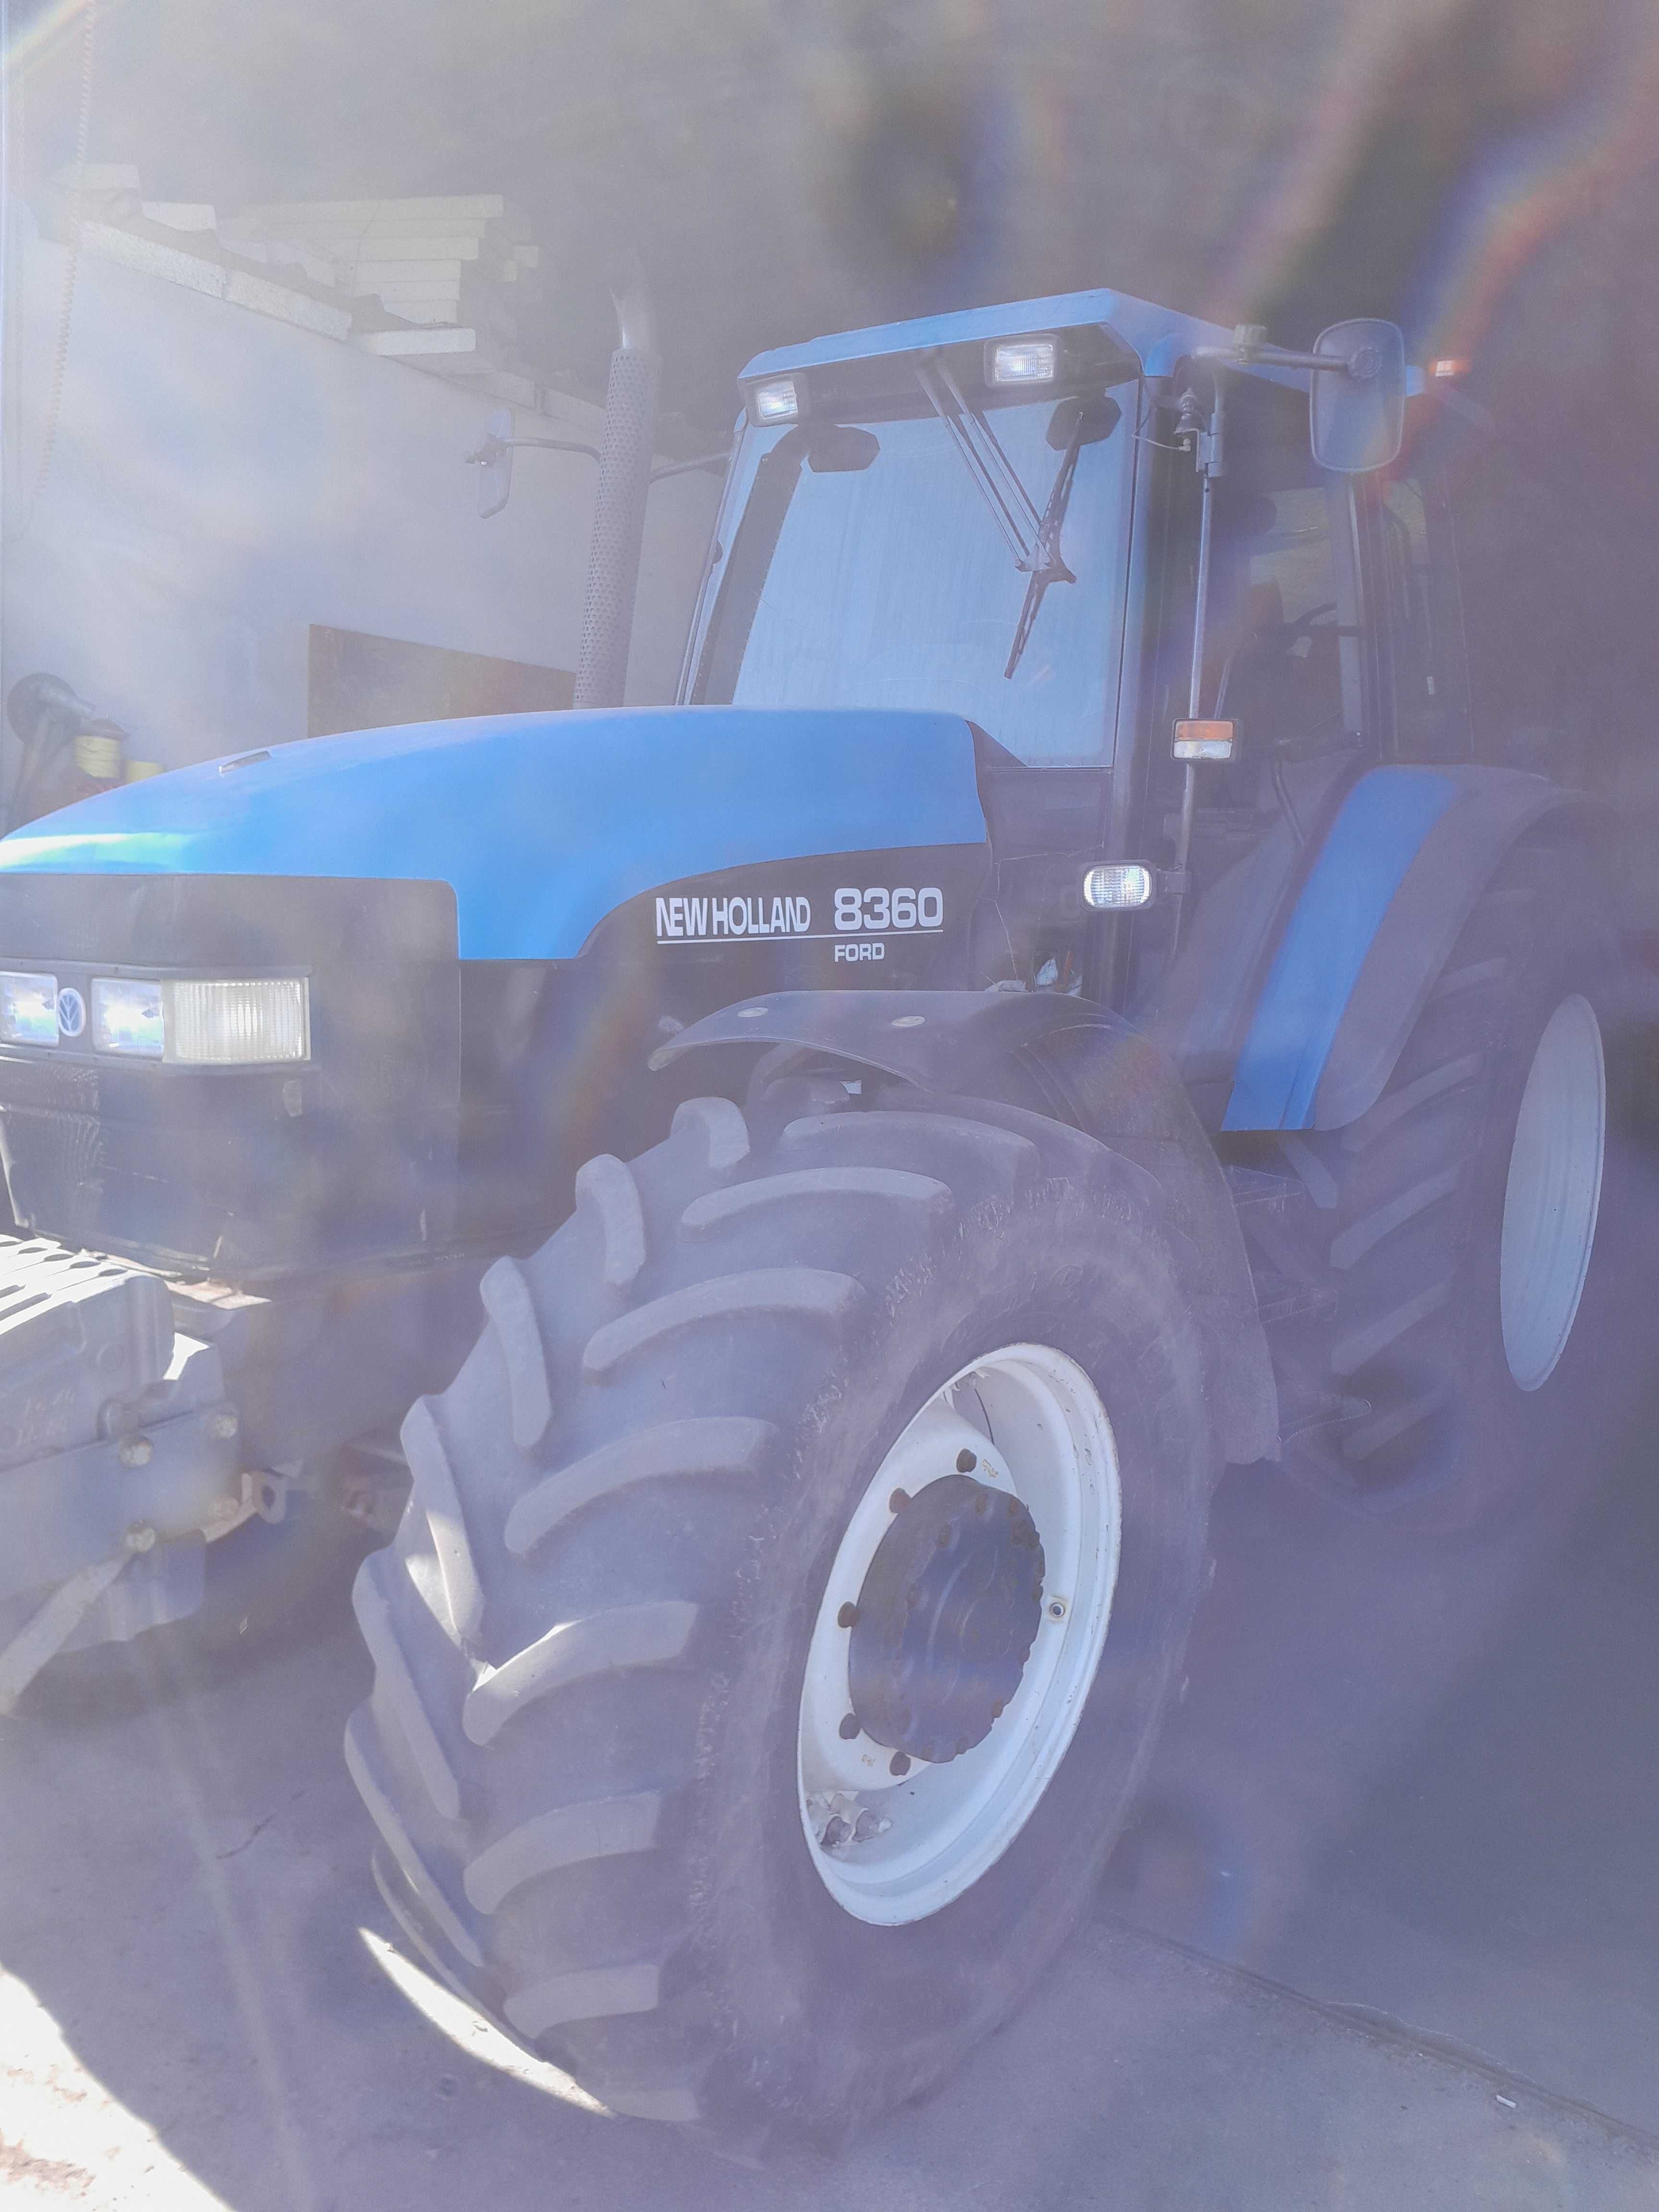 Ford 8360 turbo (new holland)